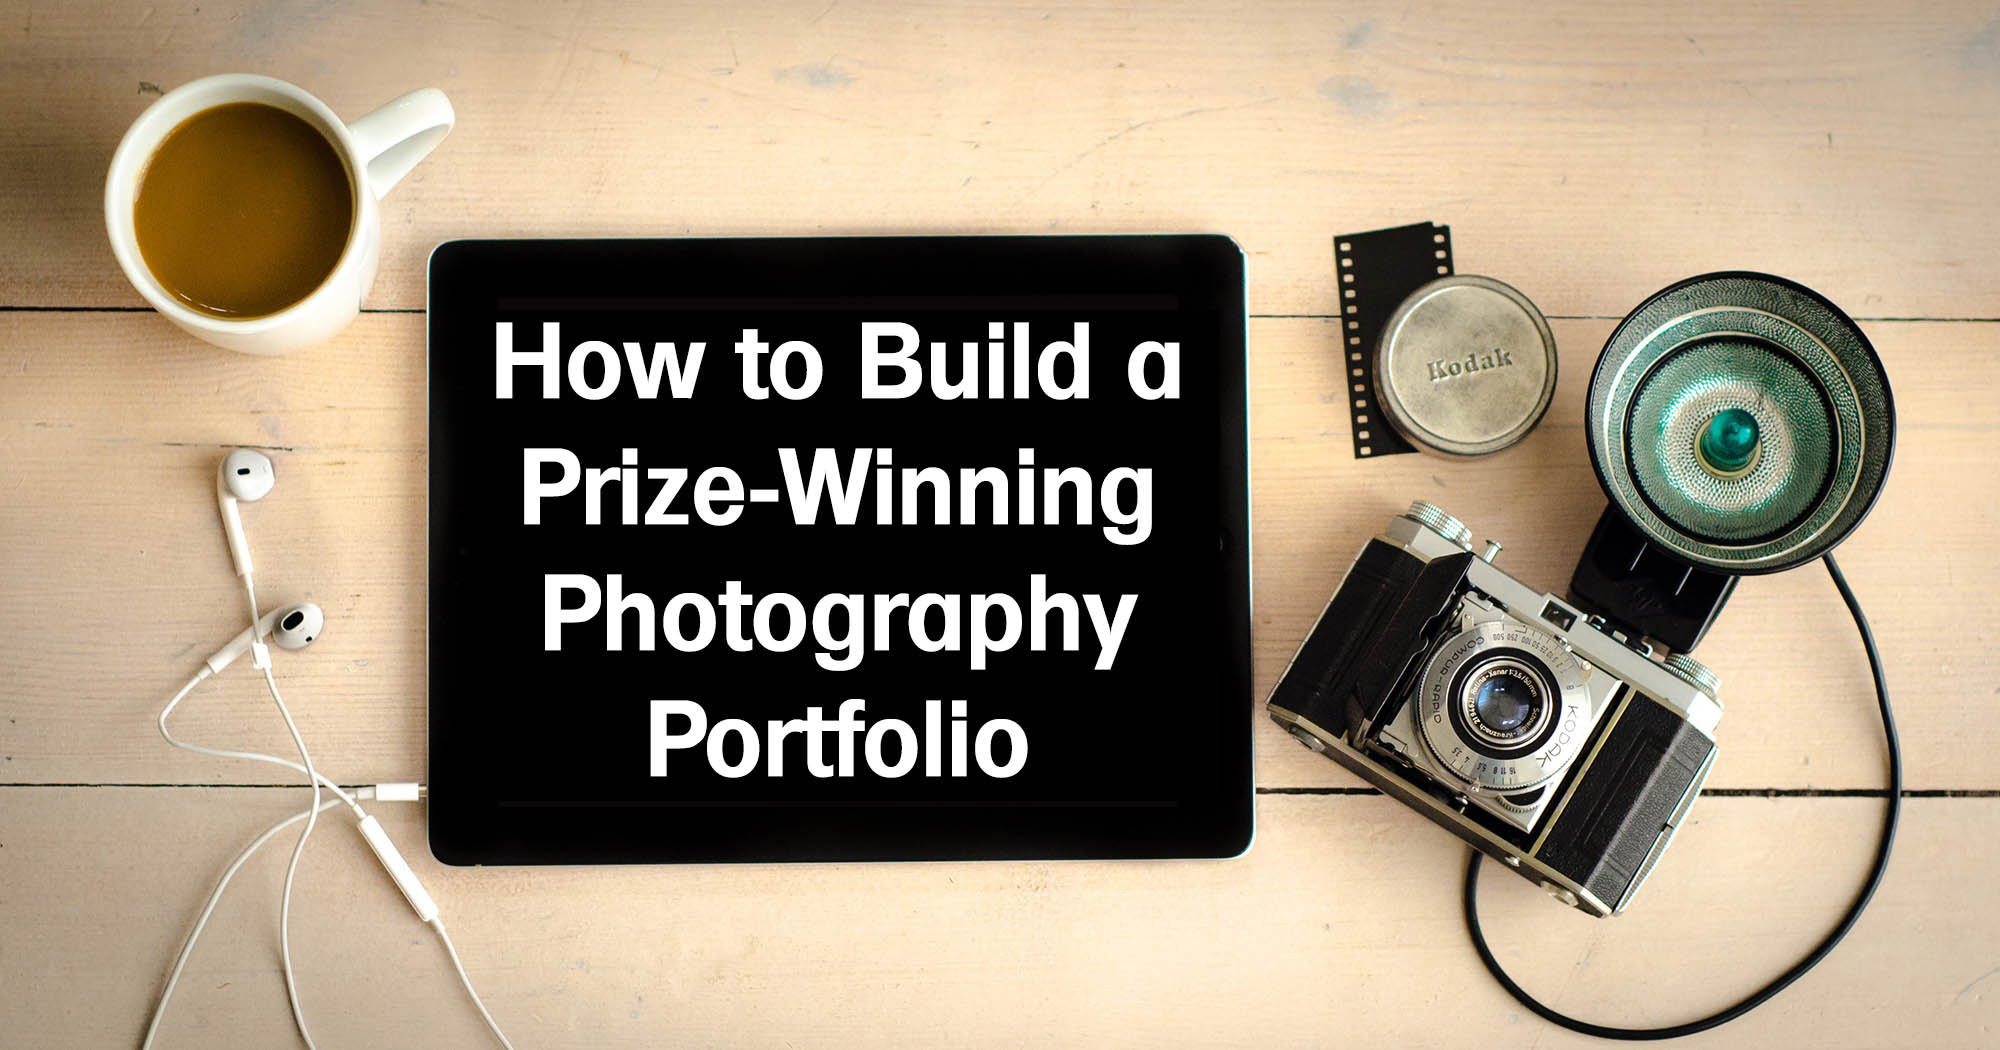 how to build a prize-winning photography portfolio FB cover image